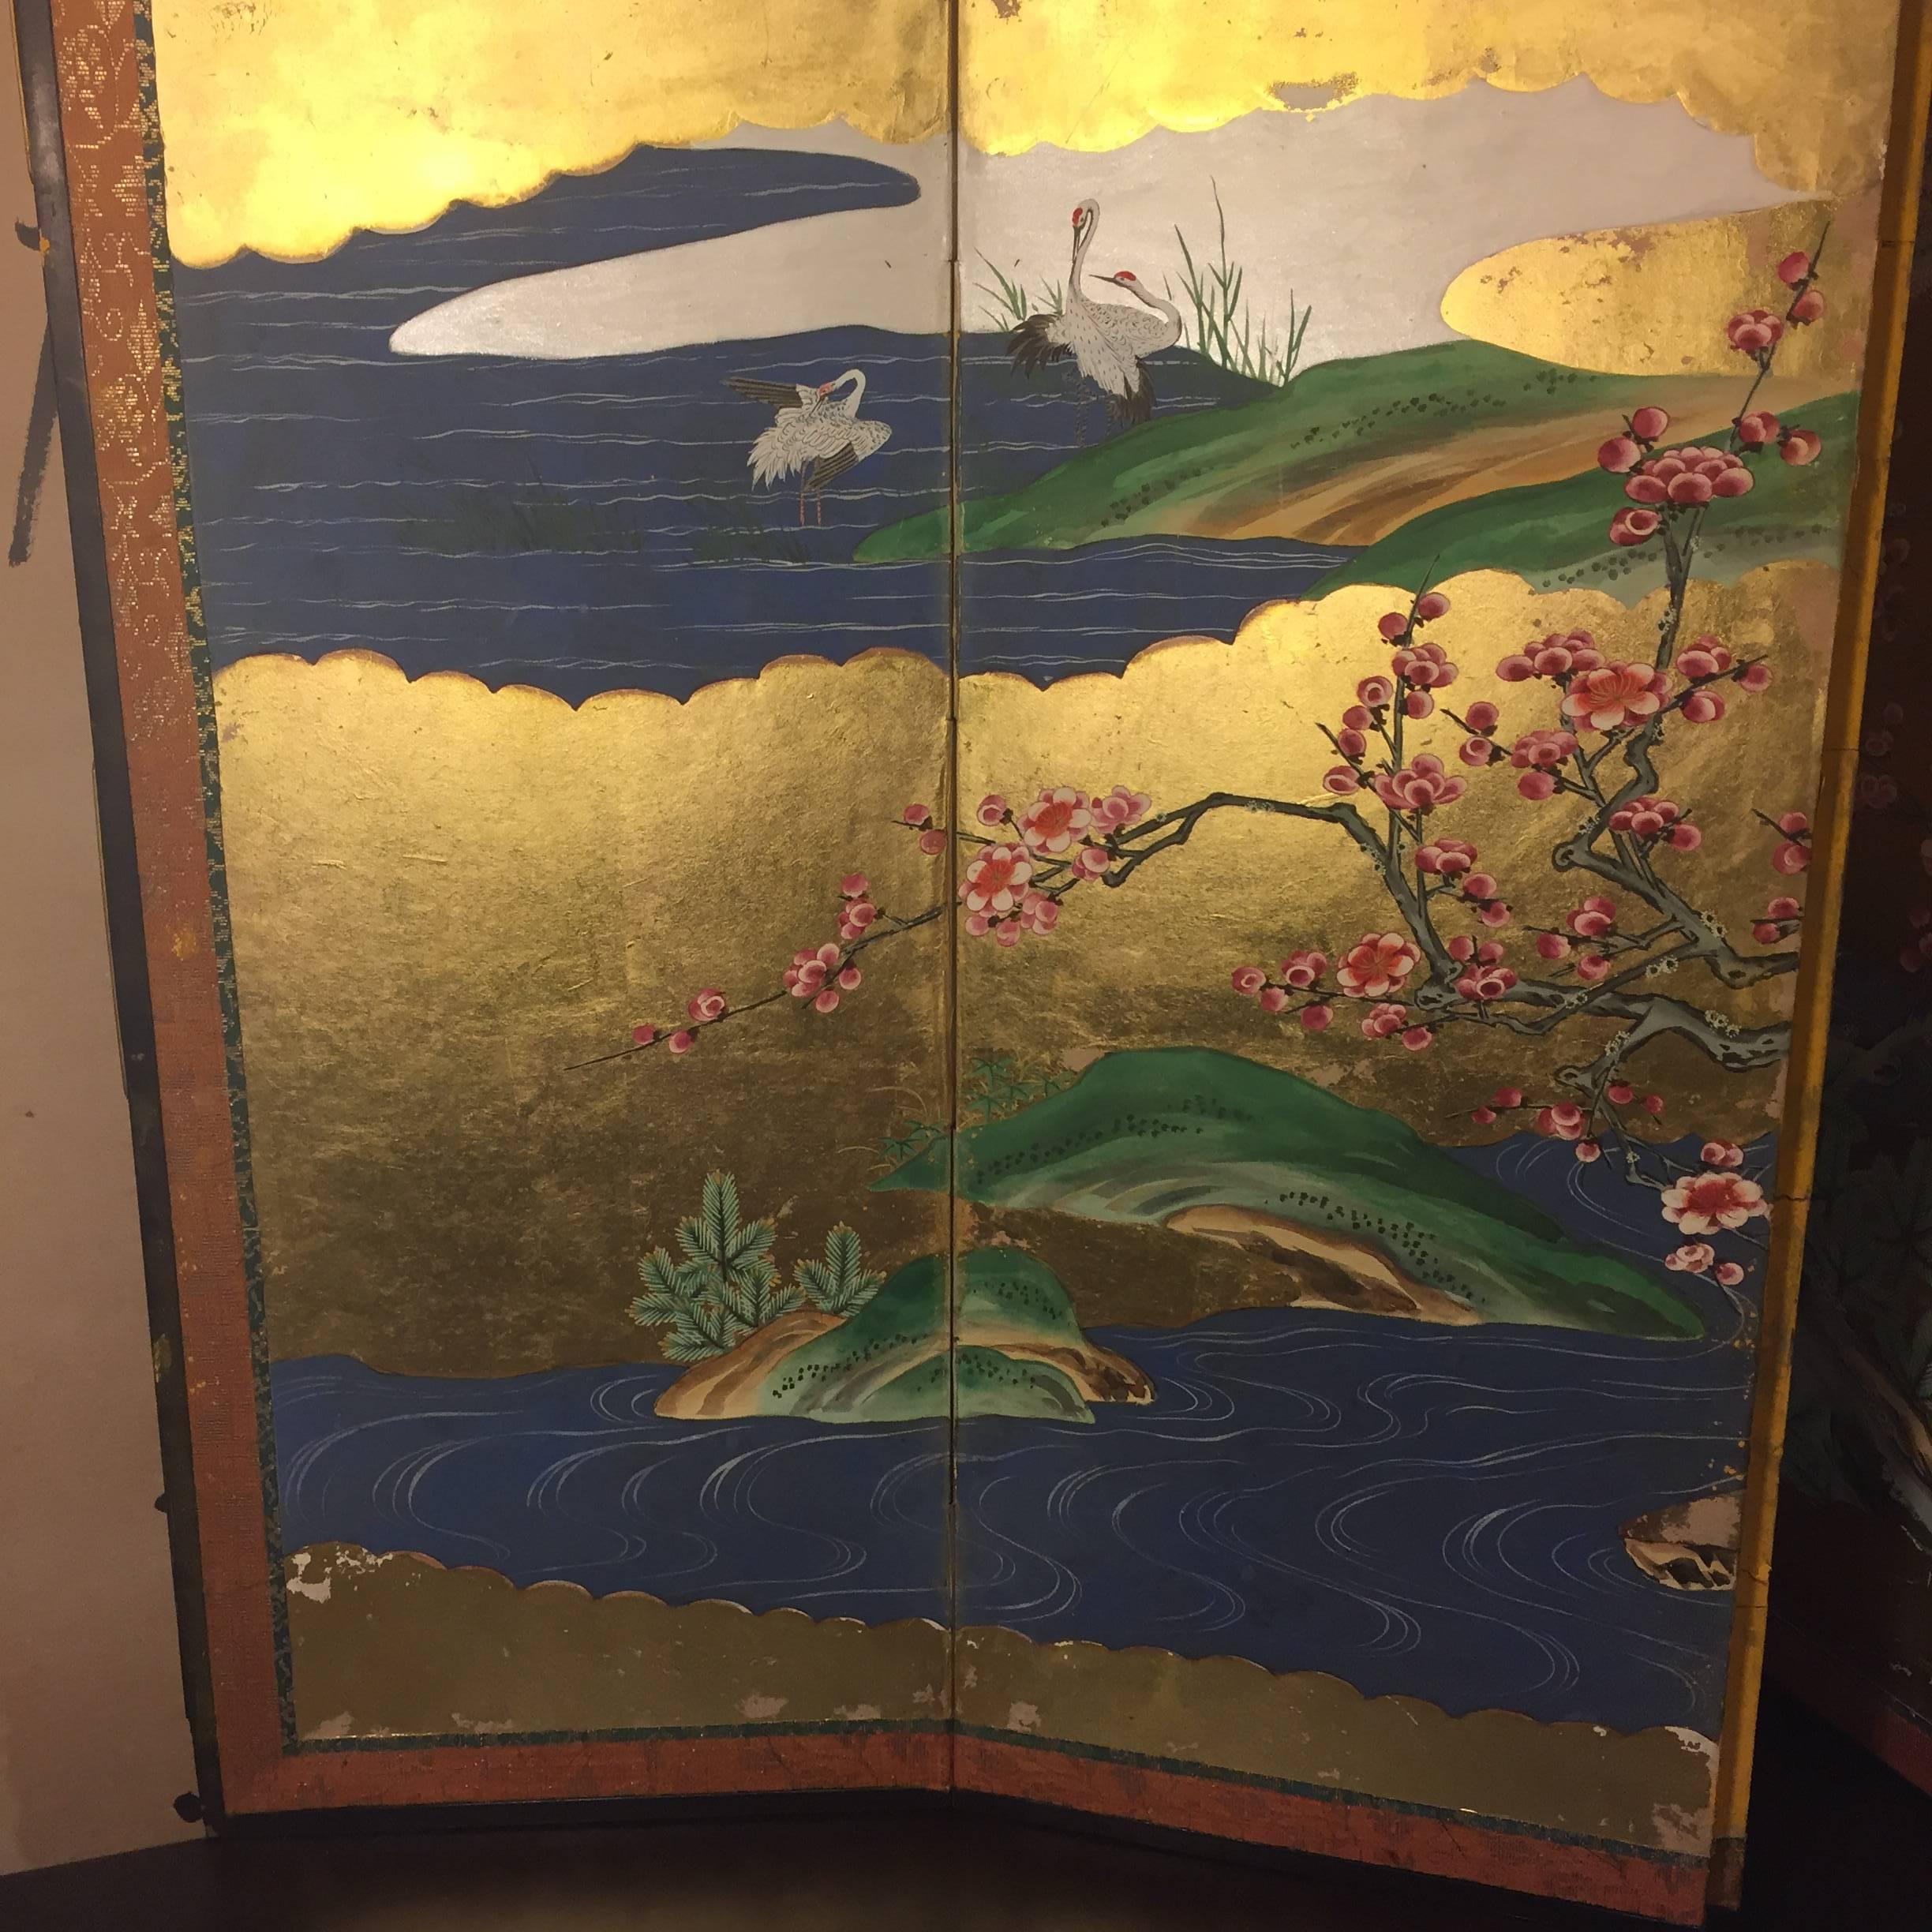 A fine small-scale Japanese antique hand-painted six panel folding screen byobu conceived in a convenient size 13.5 inches high and 36 inches long. Lovely vivid colors featuring Classic colorful spring and summer subject matter: cranes, cherry